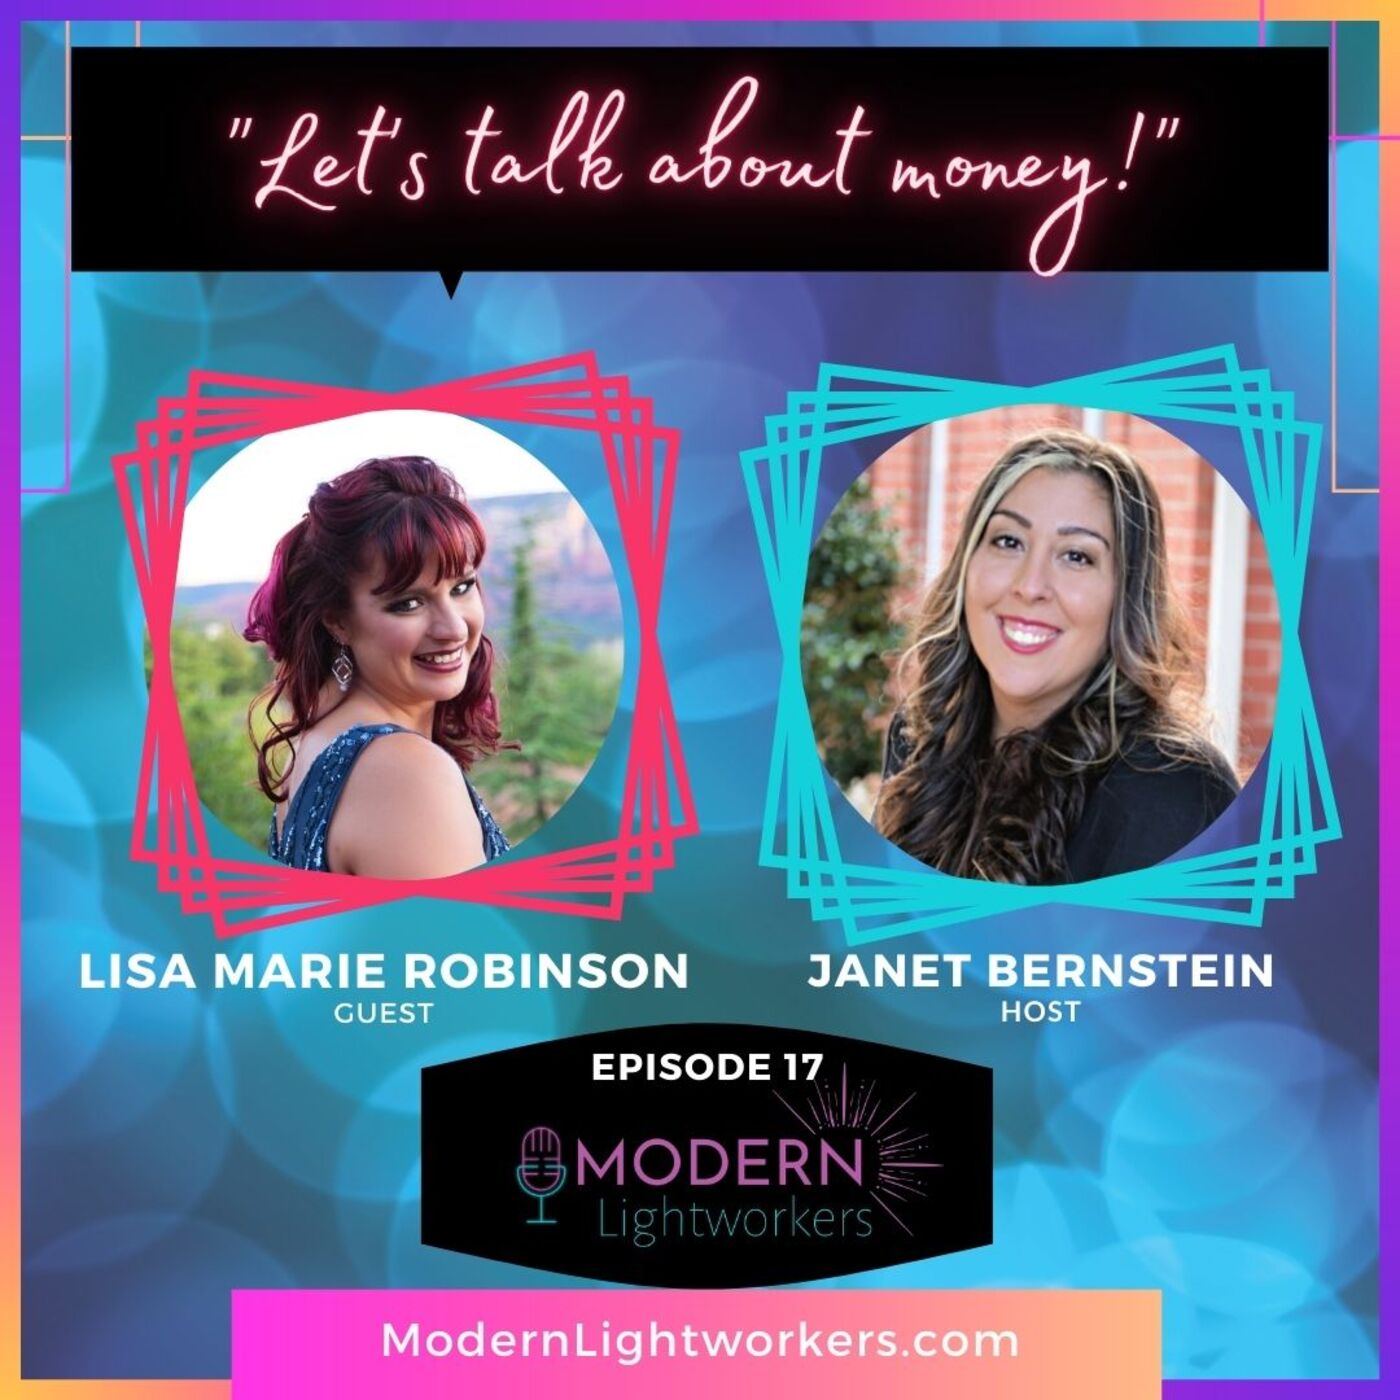 Modern Lightworkers Episode 17: Let's talk about money!